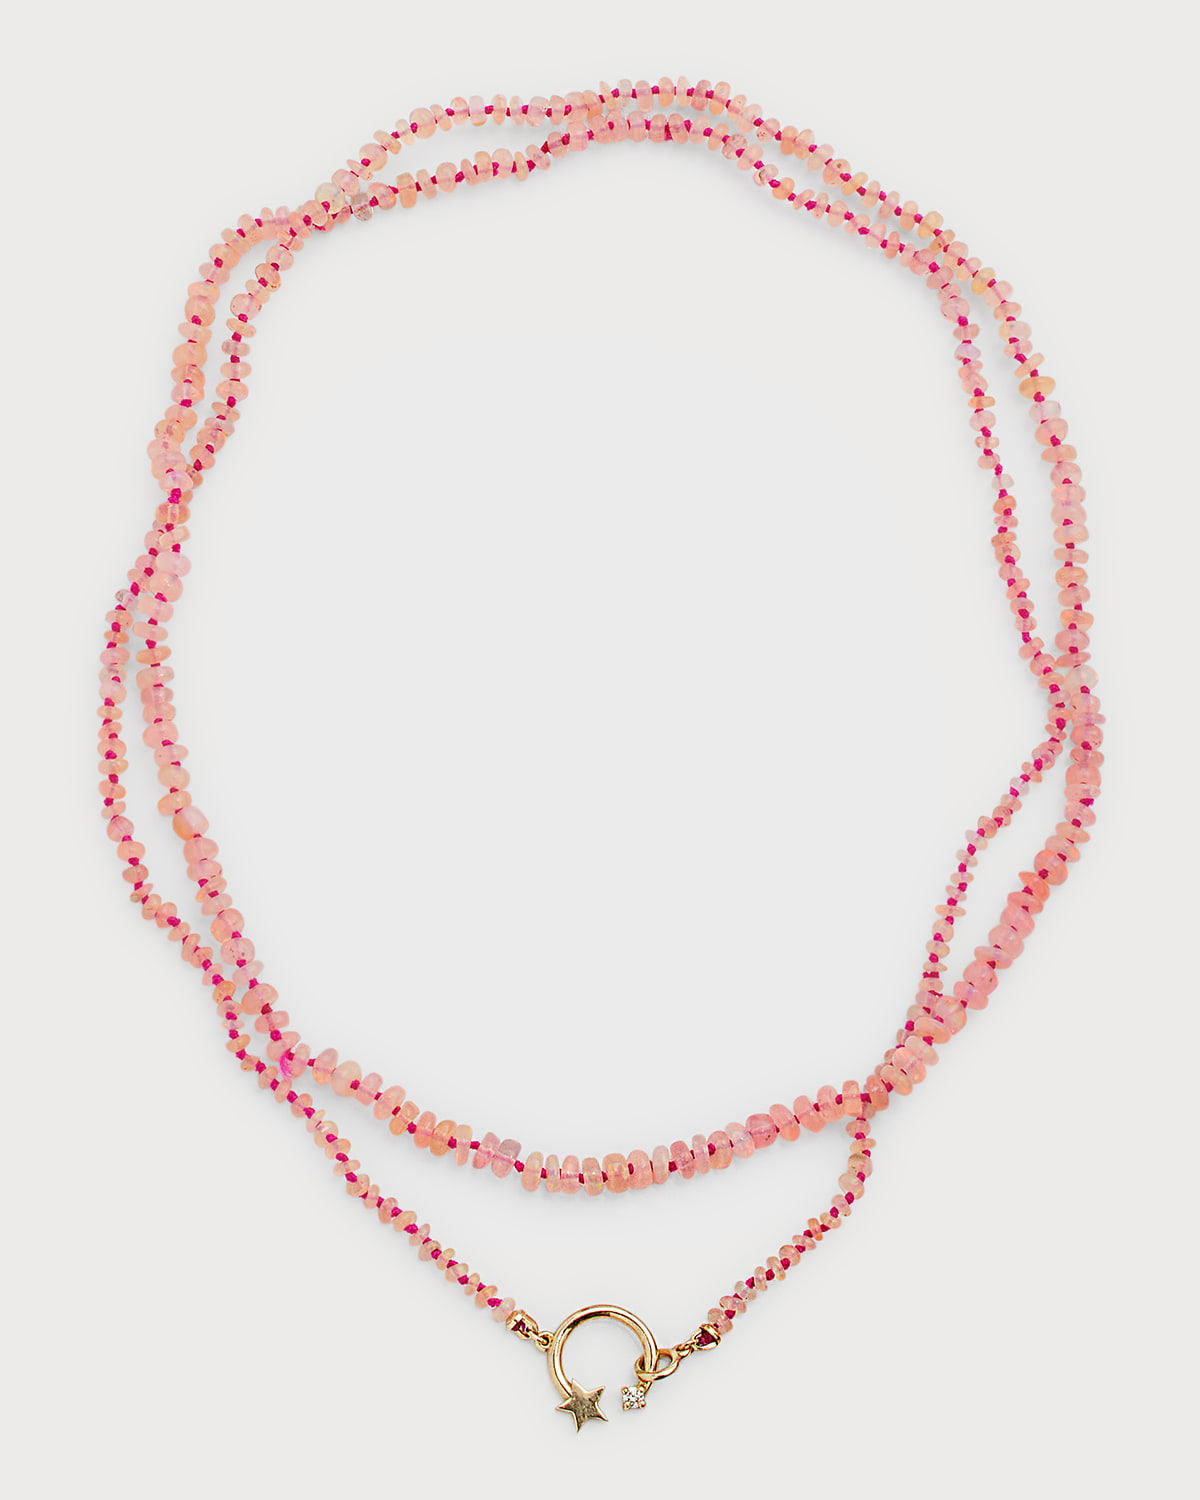 Andrea Fohrman Shooting Star Pink Opal Beaded Necklace